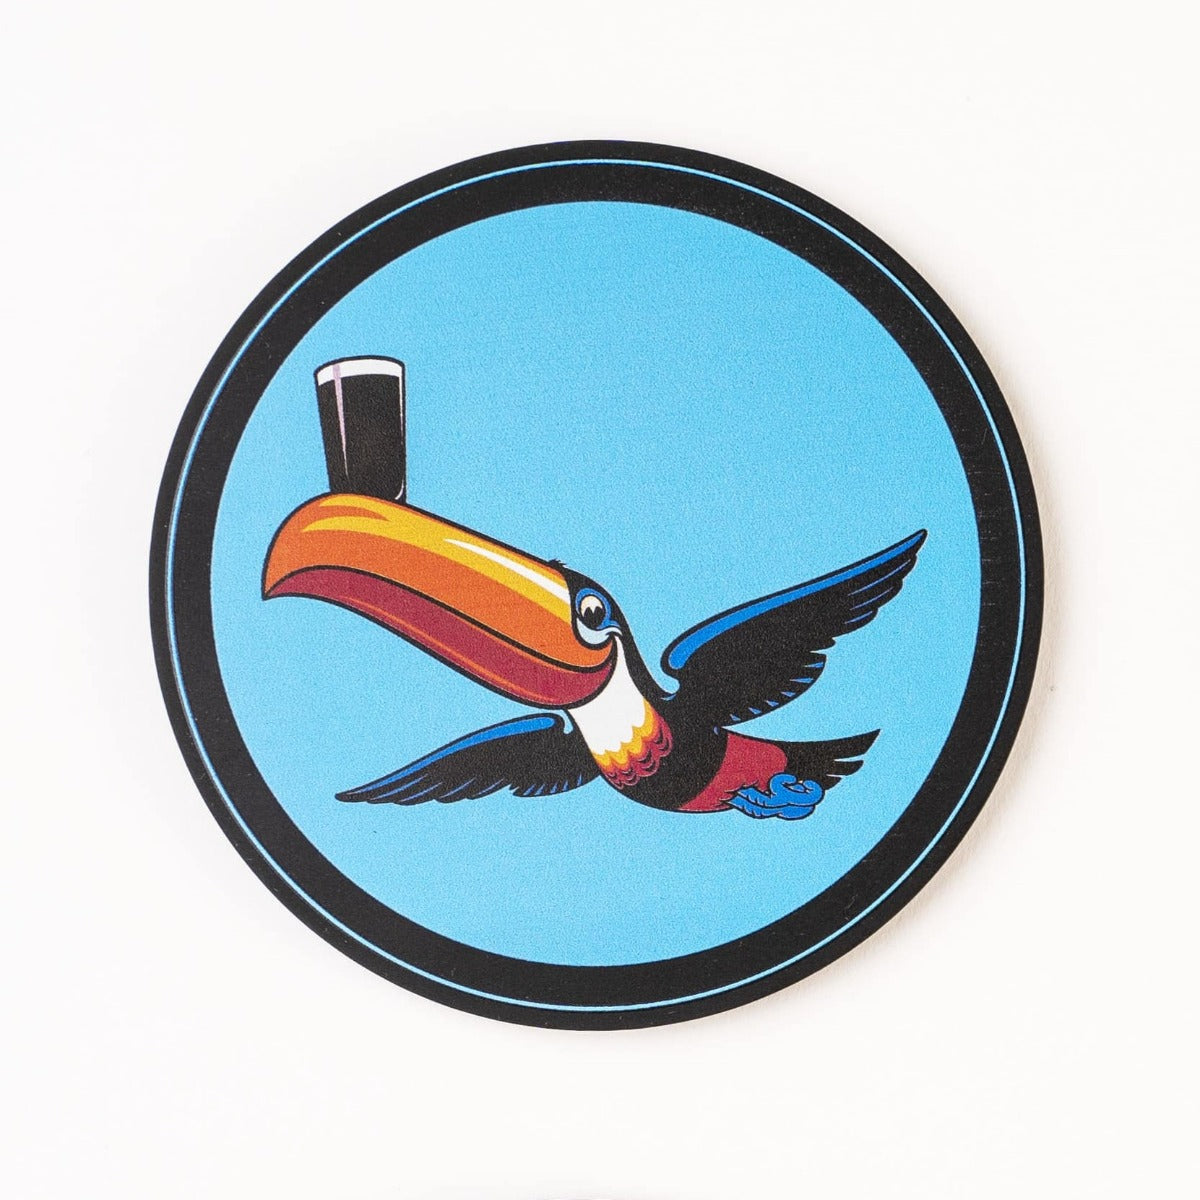 A Guinness Toucan Coasters - Pack of 4, perfect as a gift for beer enthusiasts.